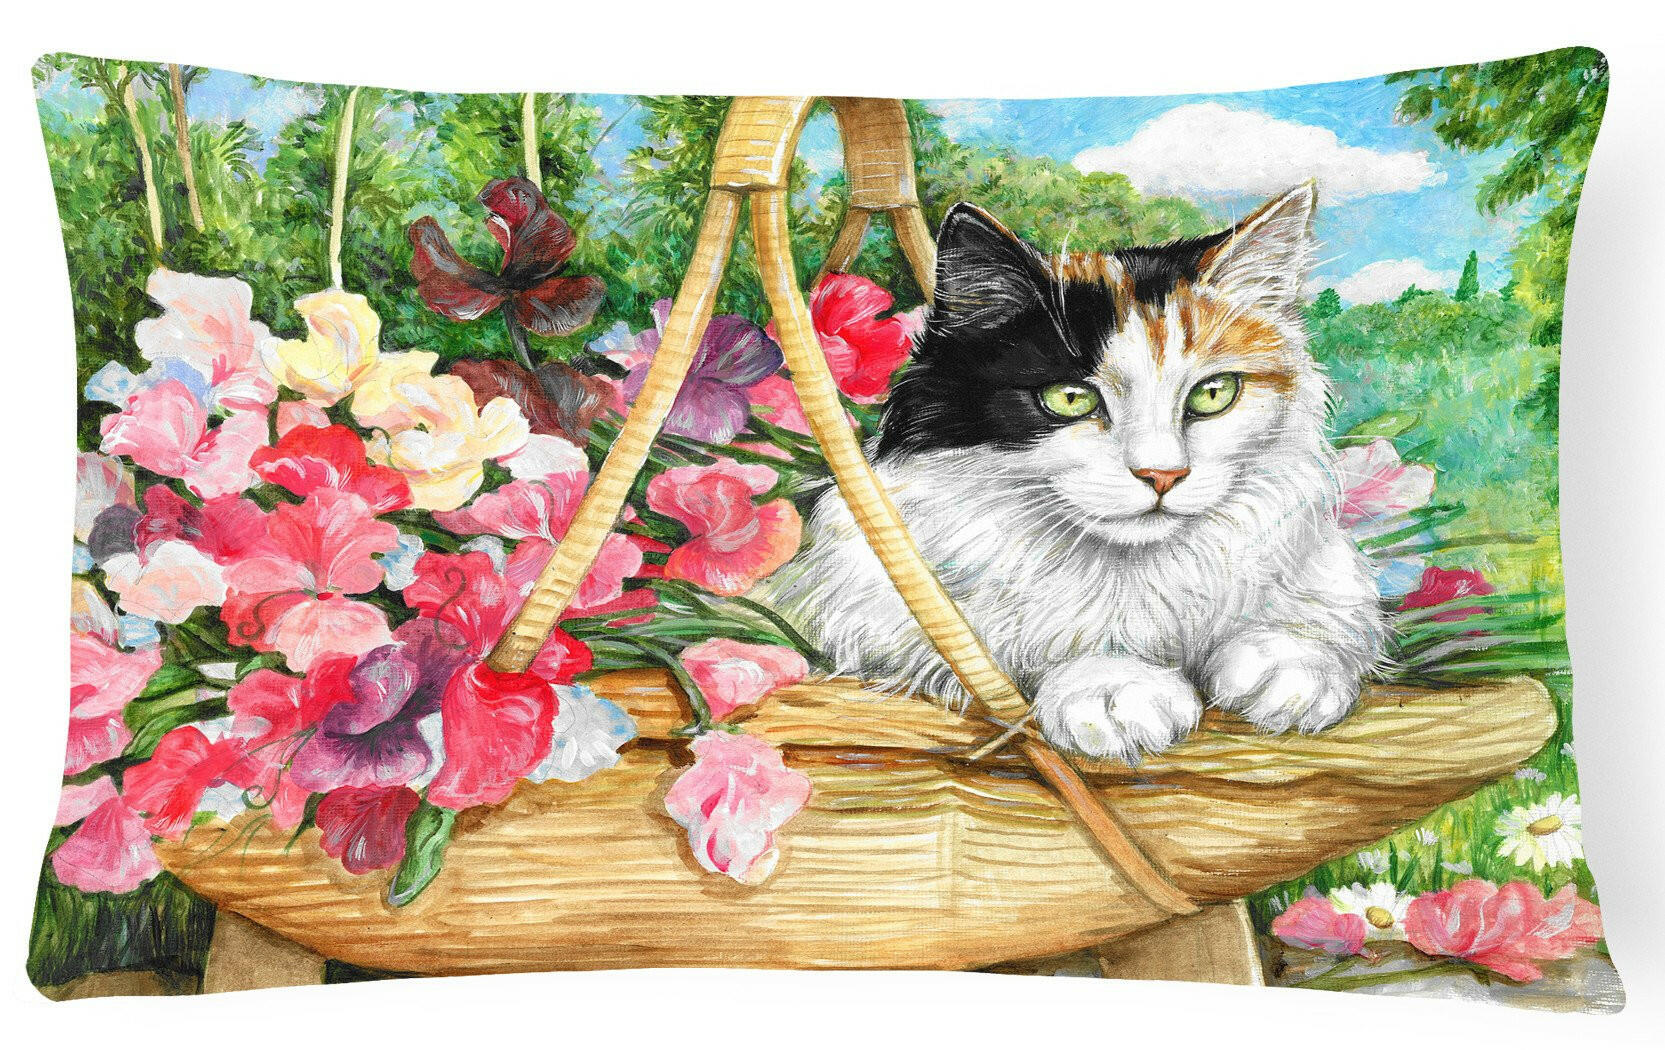 Cat In Basket Fabric Decorative Pillow CDCO0178PW1216 by Caroline's Treasures